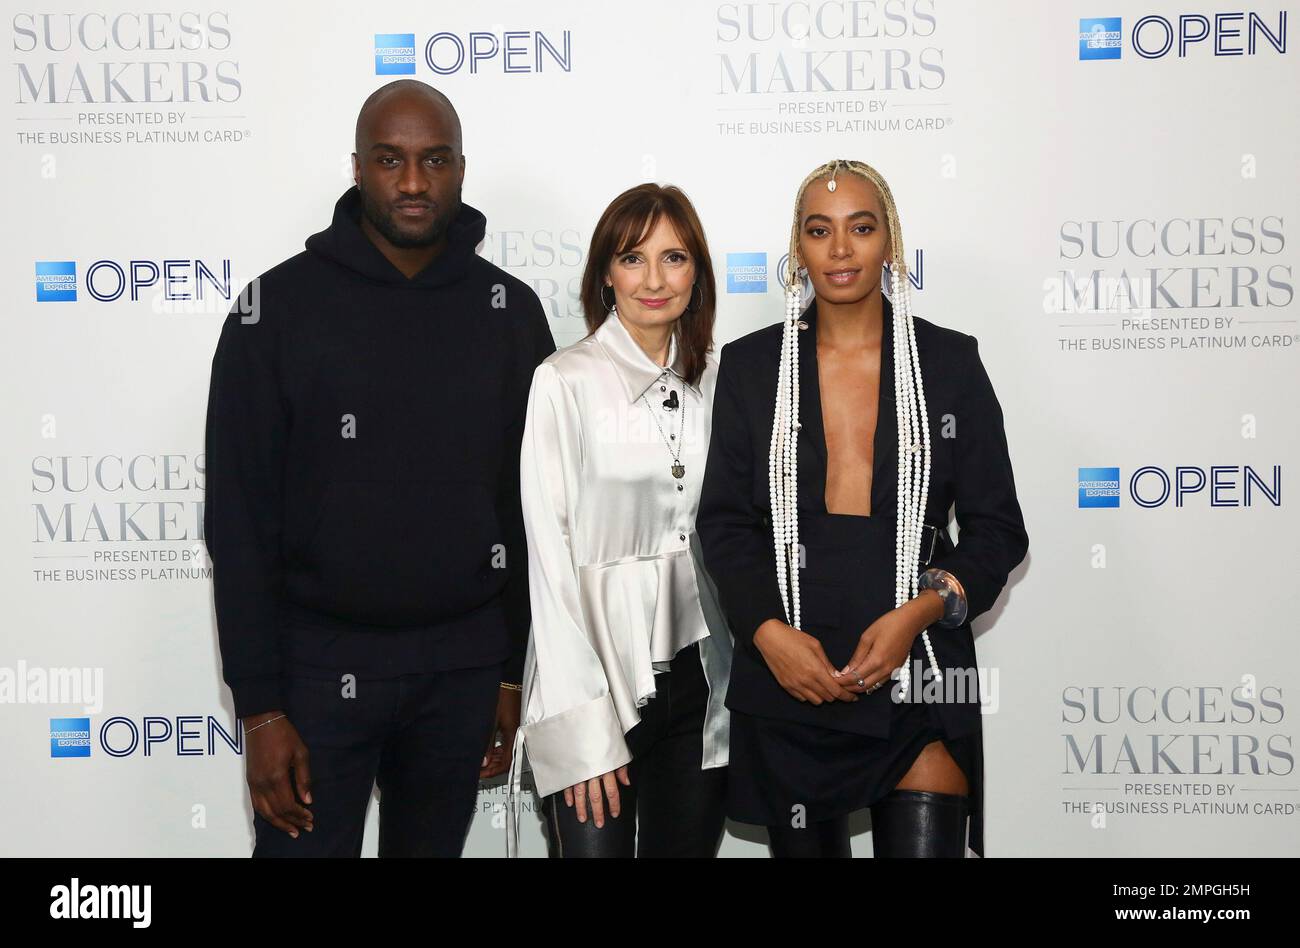 IMAGE DISTRIBUTED FOR AMERICAN EXPRESS OPEN - Pictured from left to right,  Virgil Abloh, Founder of Off-White, Susan Sobbott, President of Global  Commercial Payments at American Express and Solange Knowles, Founder of